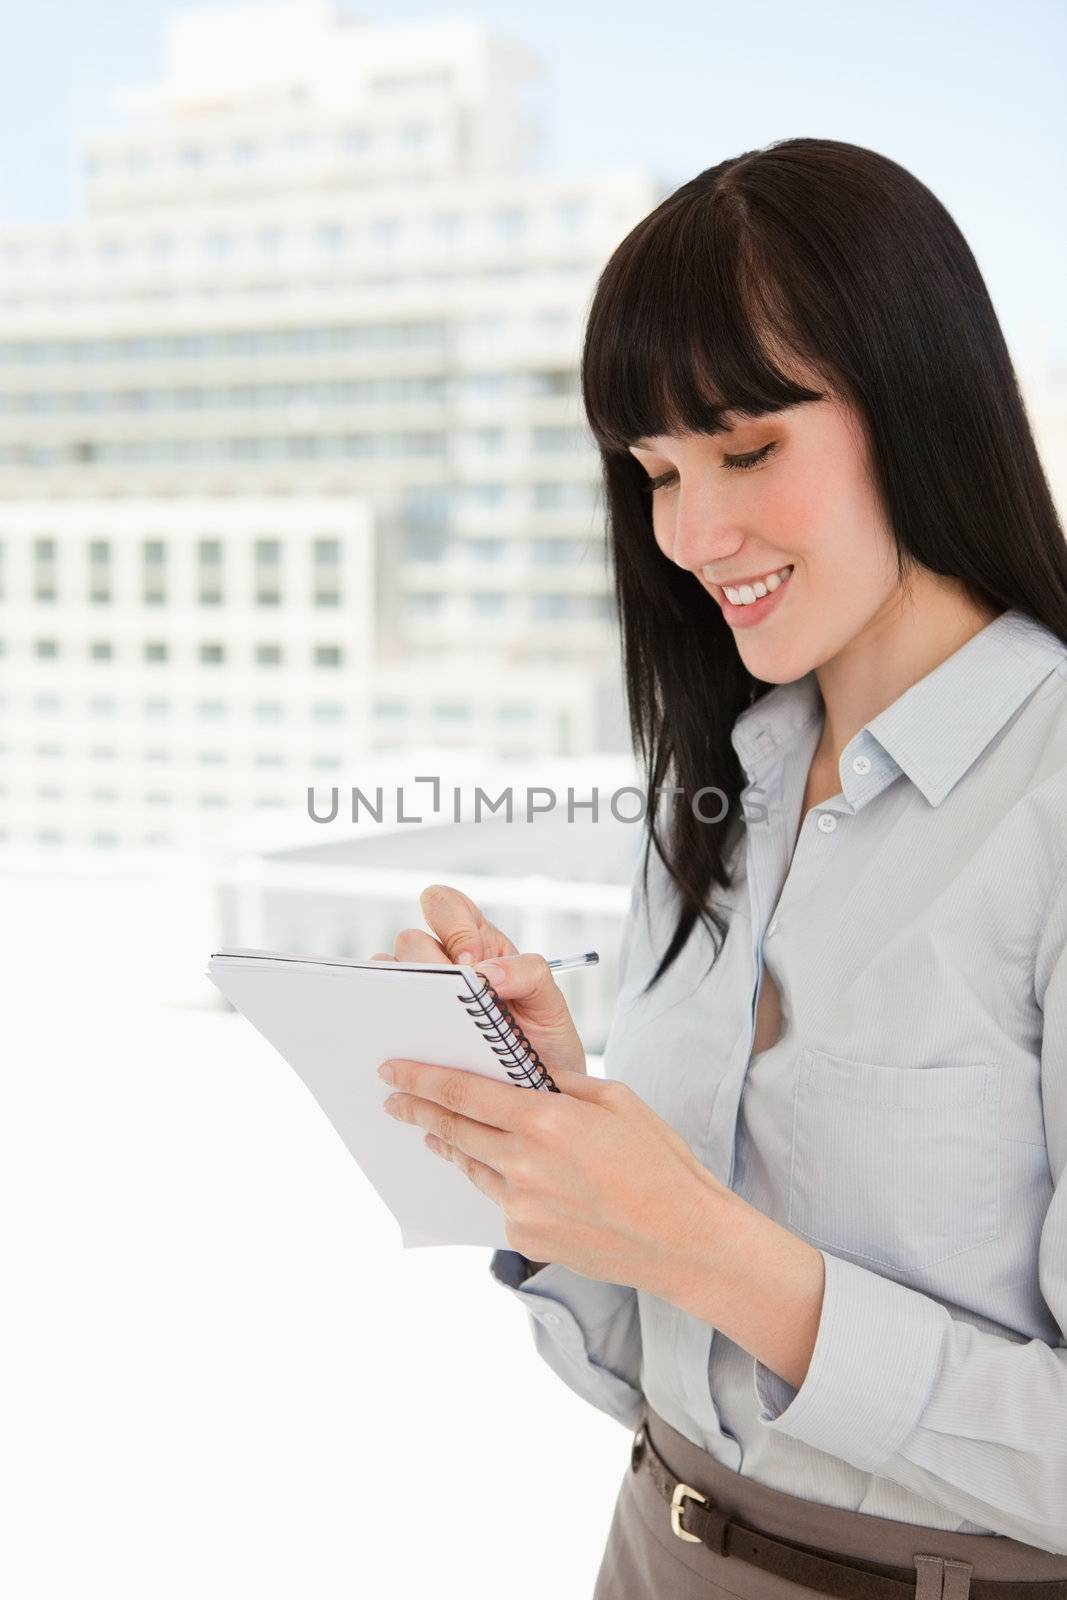 A woman in her office writing down notes on her note pad